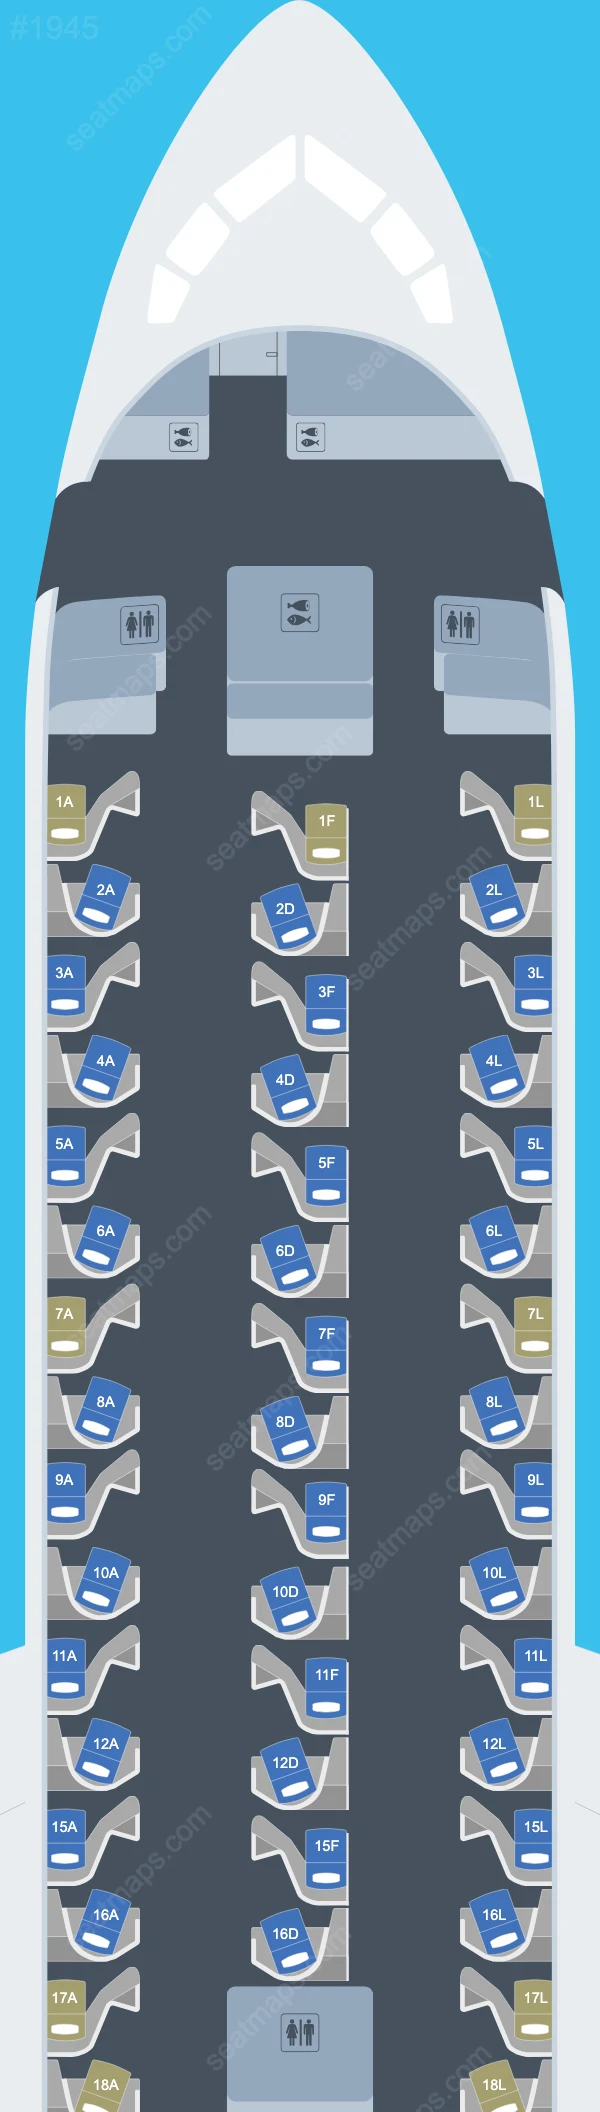 United Boeing 767-300 ER seatmap mobile preview